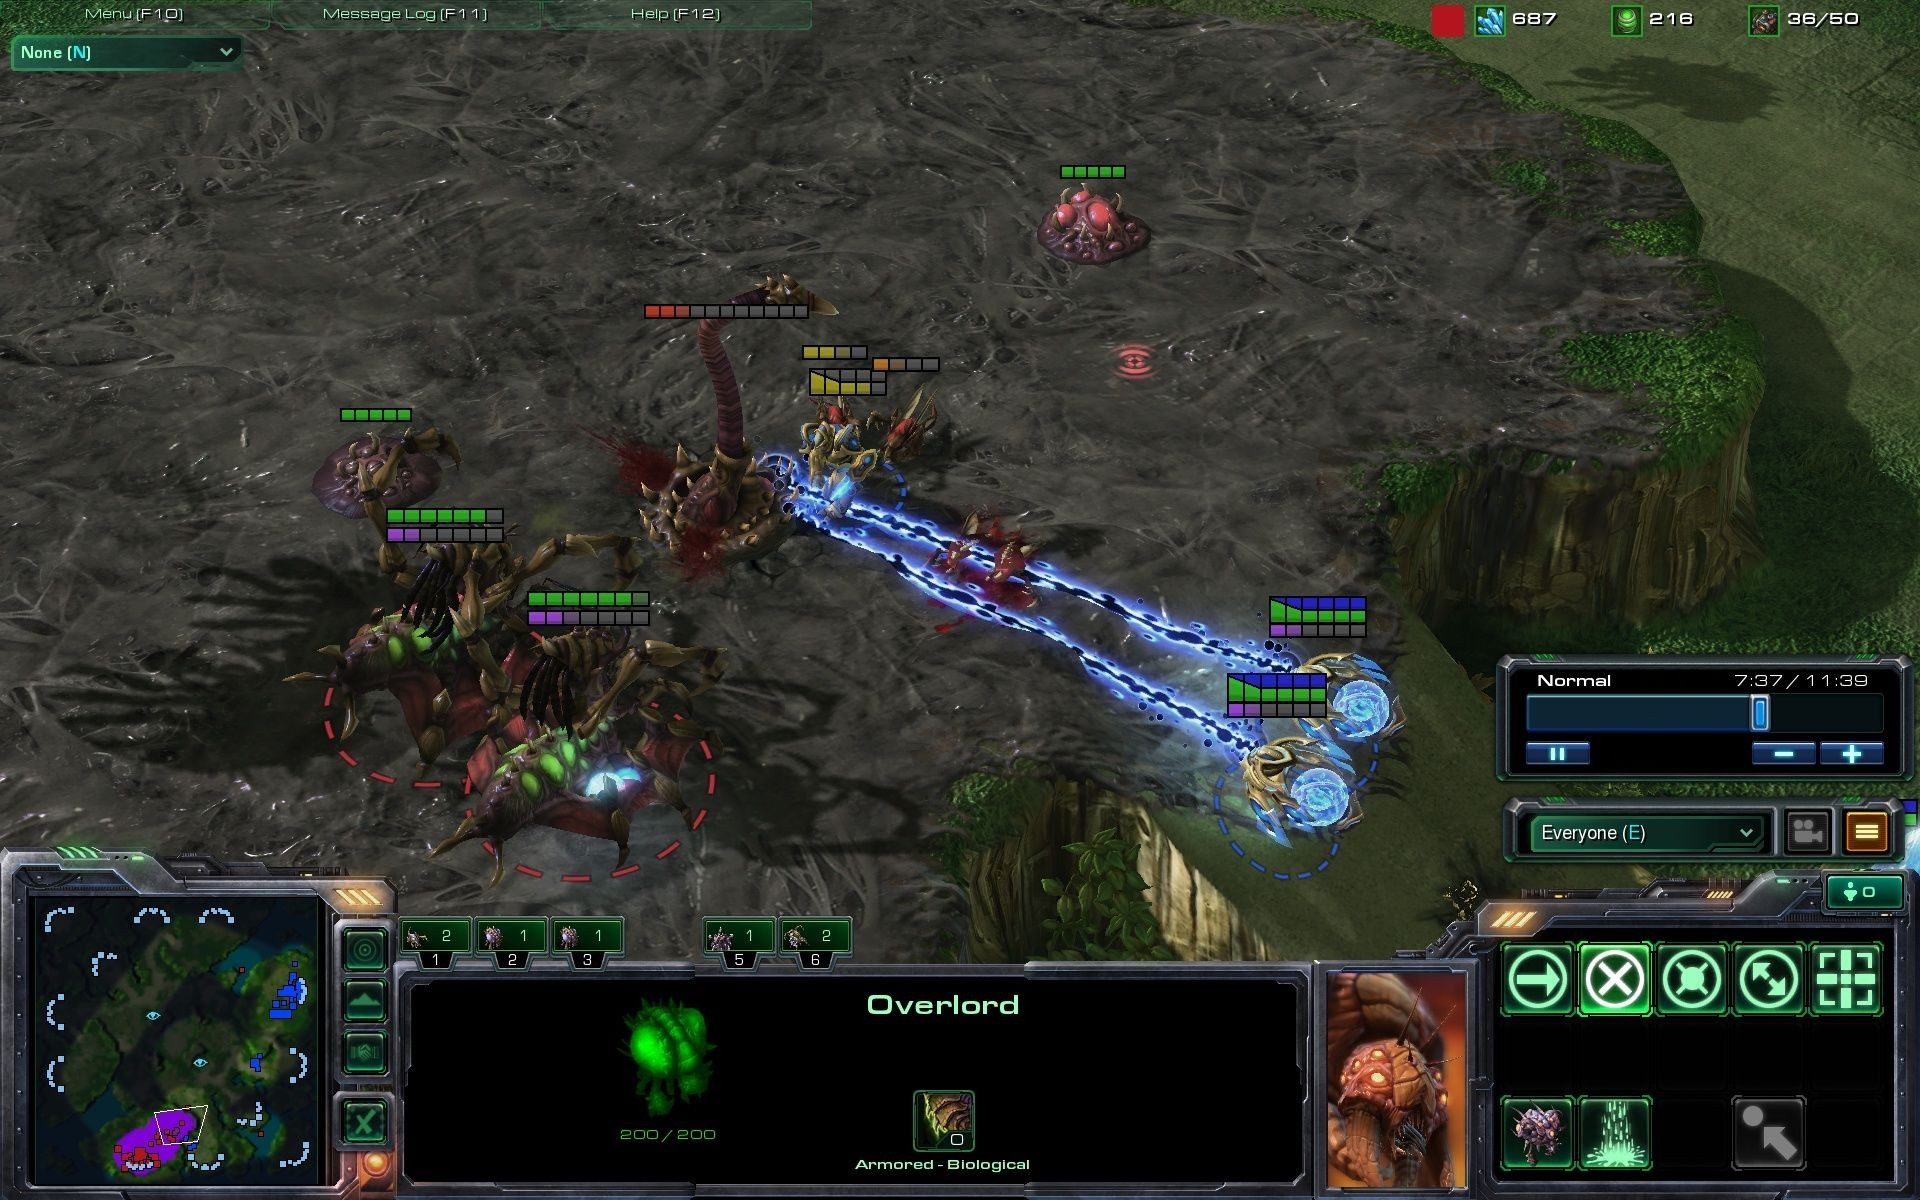 starcraft 2 campaign units in multiplayer